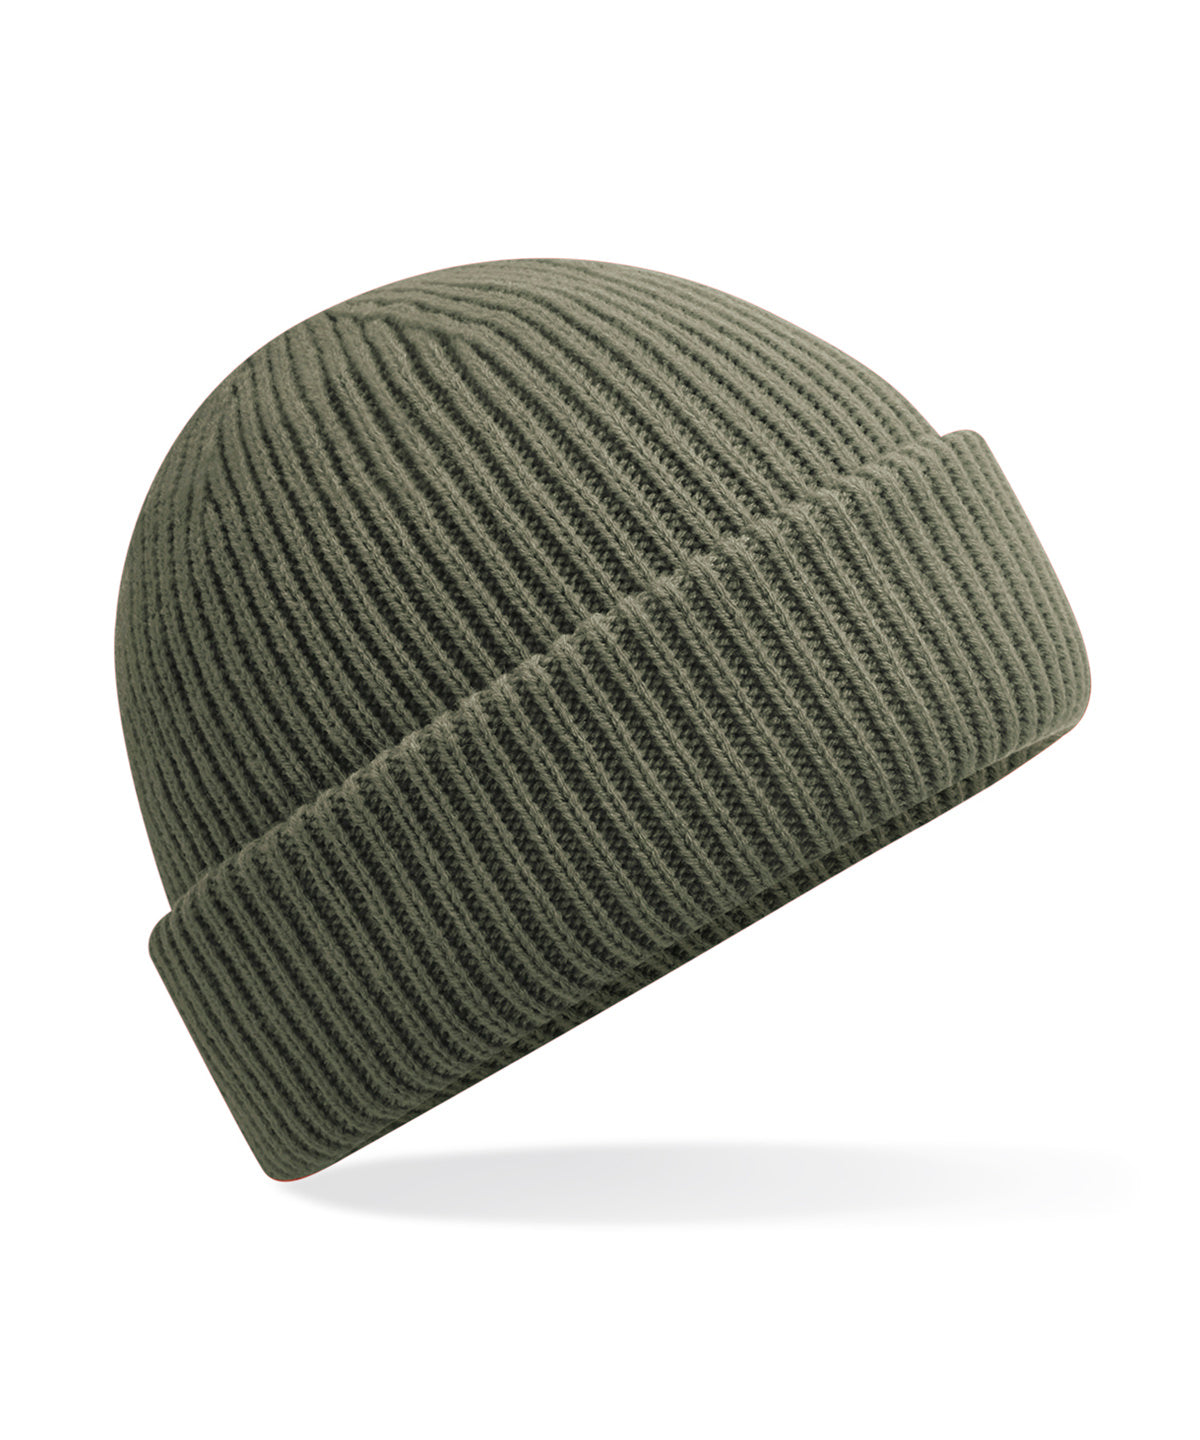 Personalised Hats - Olive Beechfield Wind-resistant breathable elements beanie